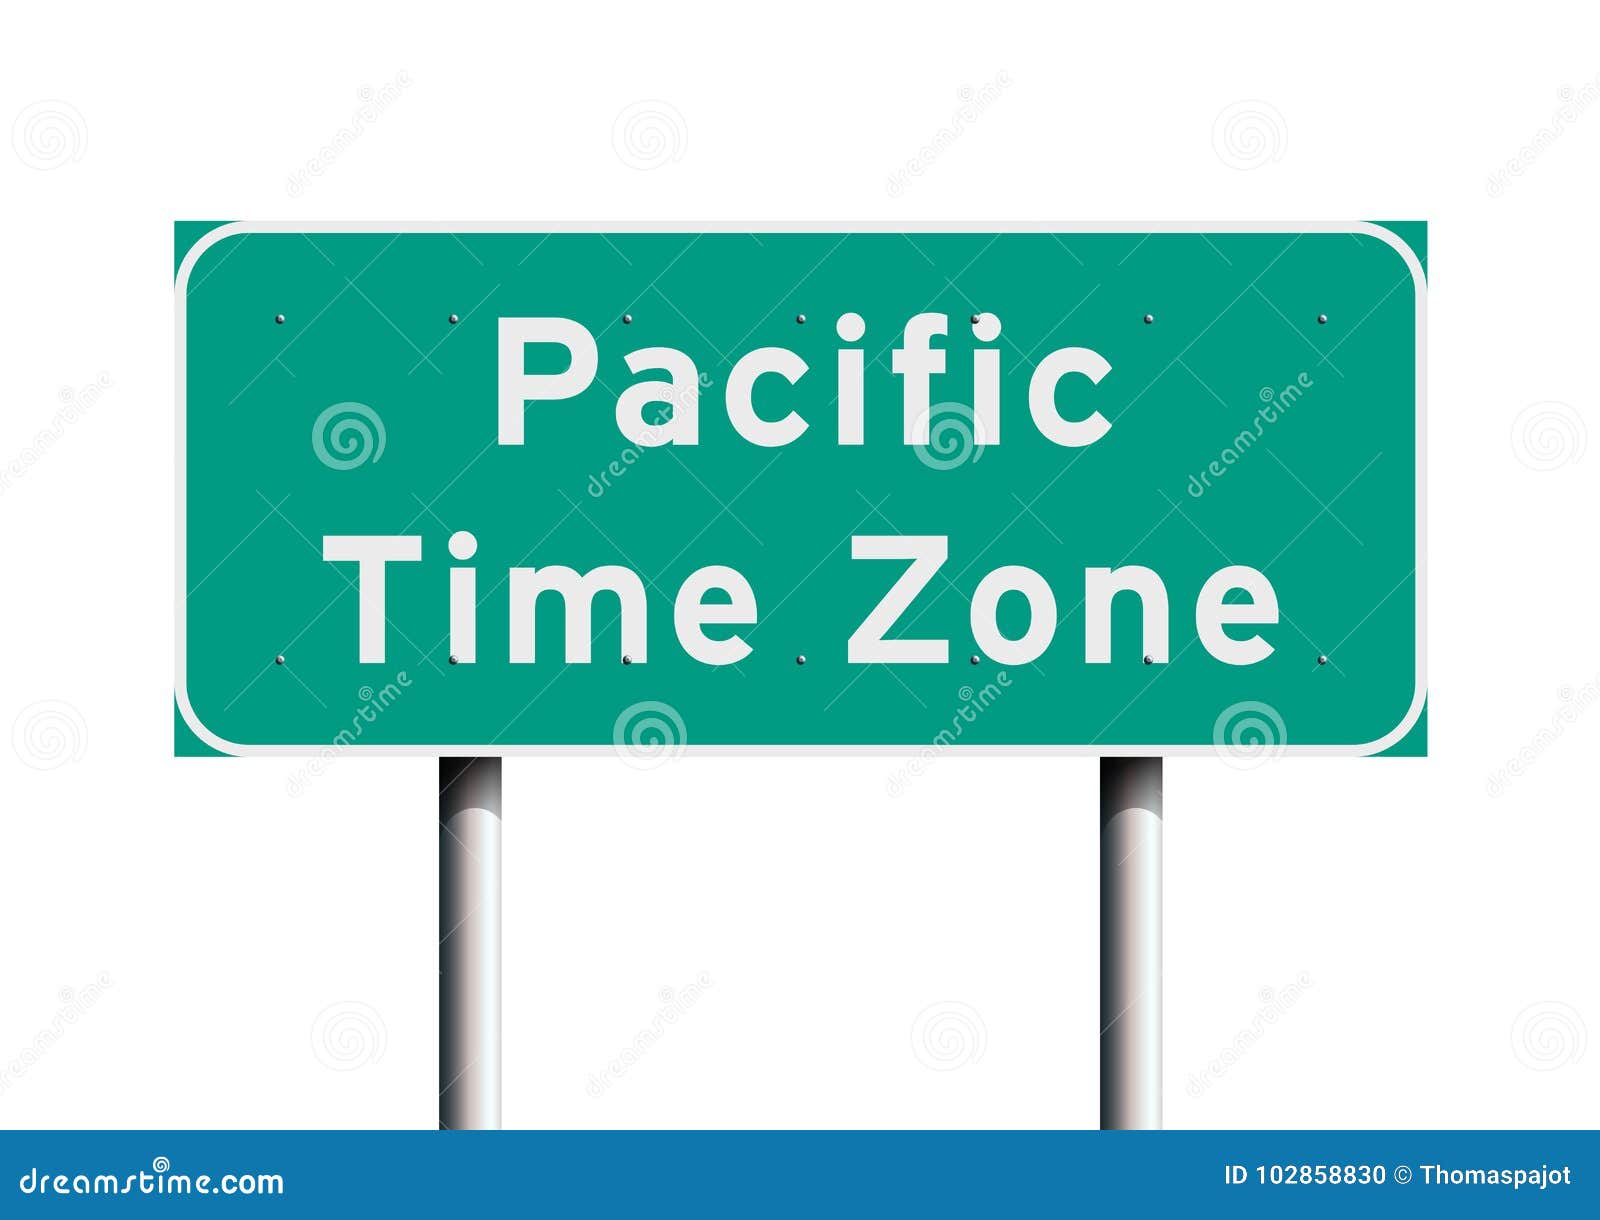 Pacific time